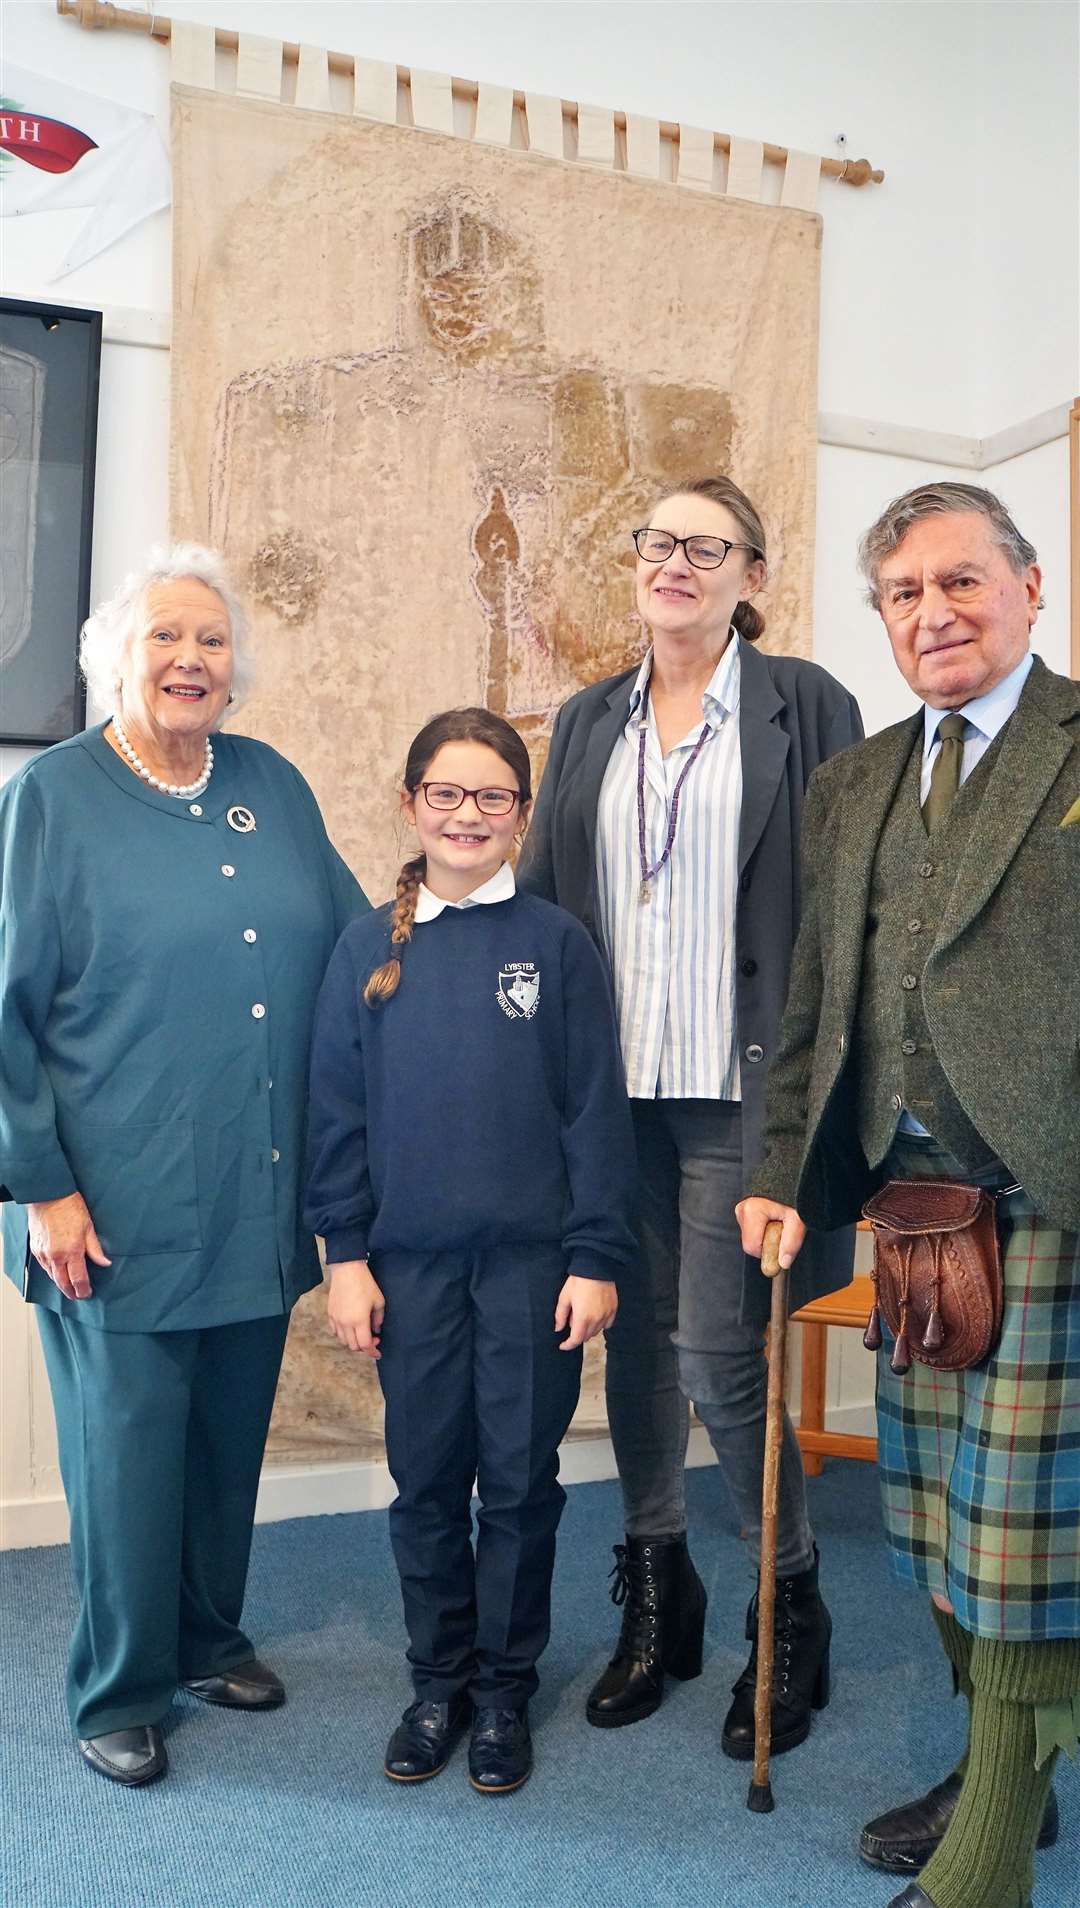 Bunty Gunn, a Lybster Primary pupil, Merran Gunn and clan chief Iain Gunn at the Clan Gunn Centre in Latheron in 2008. A rubbing taken of the Westford Knight carving is behind the group. Picture: DGS